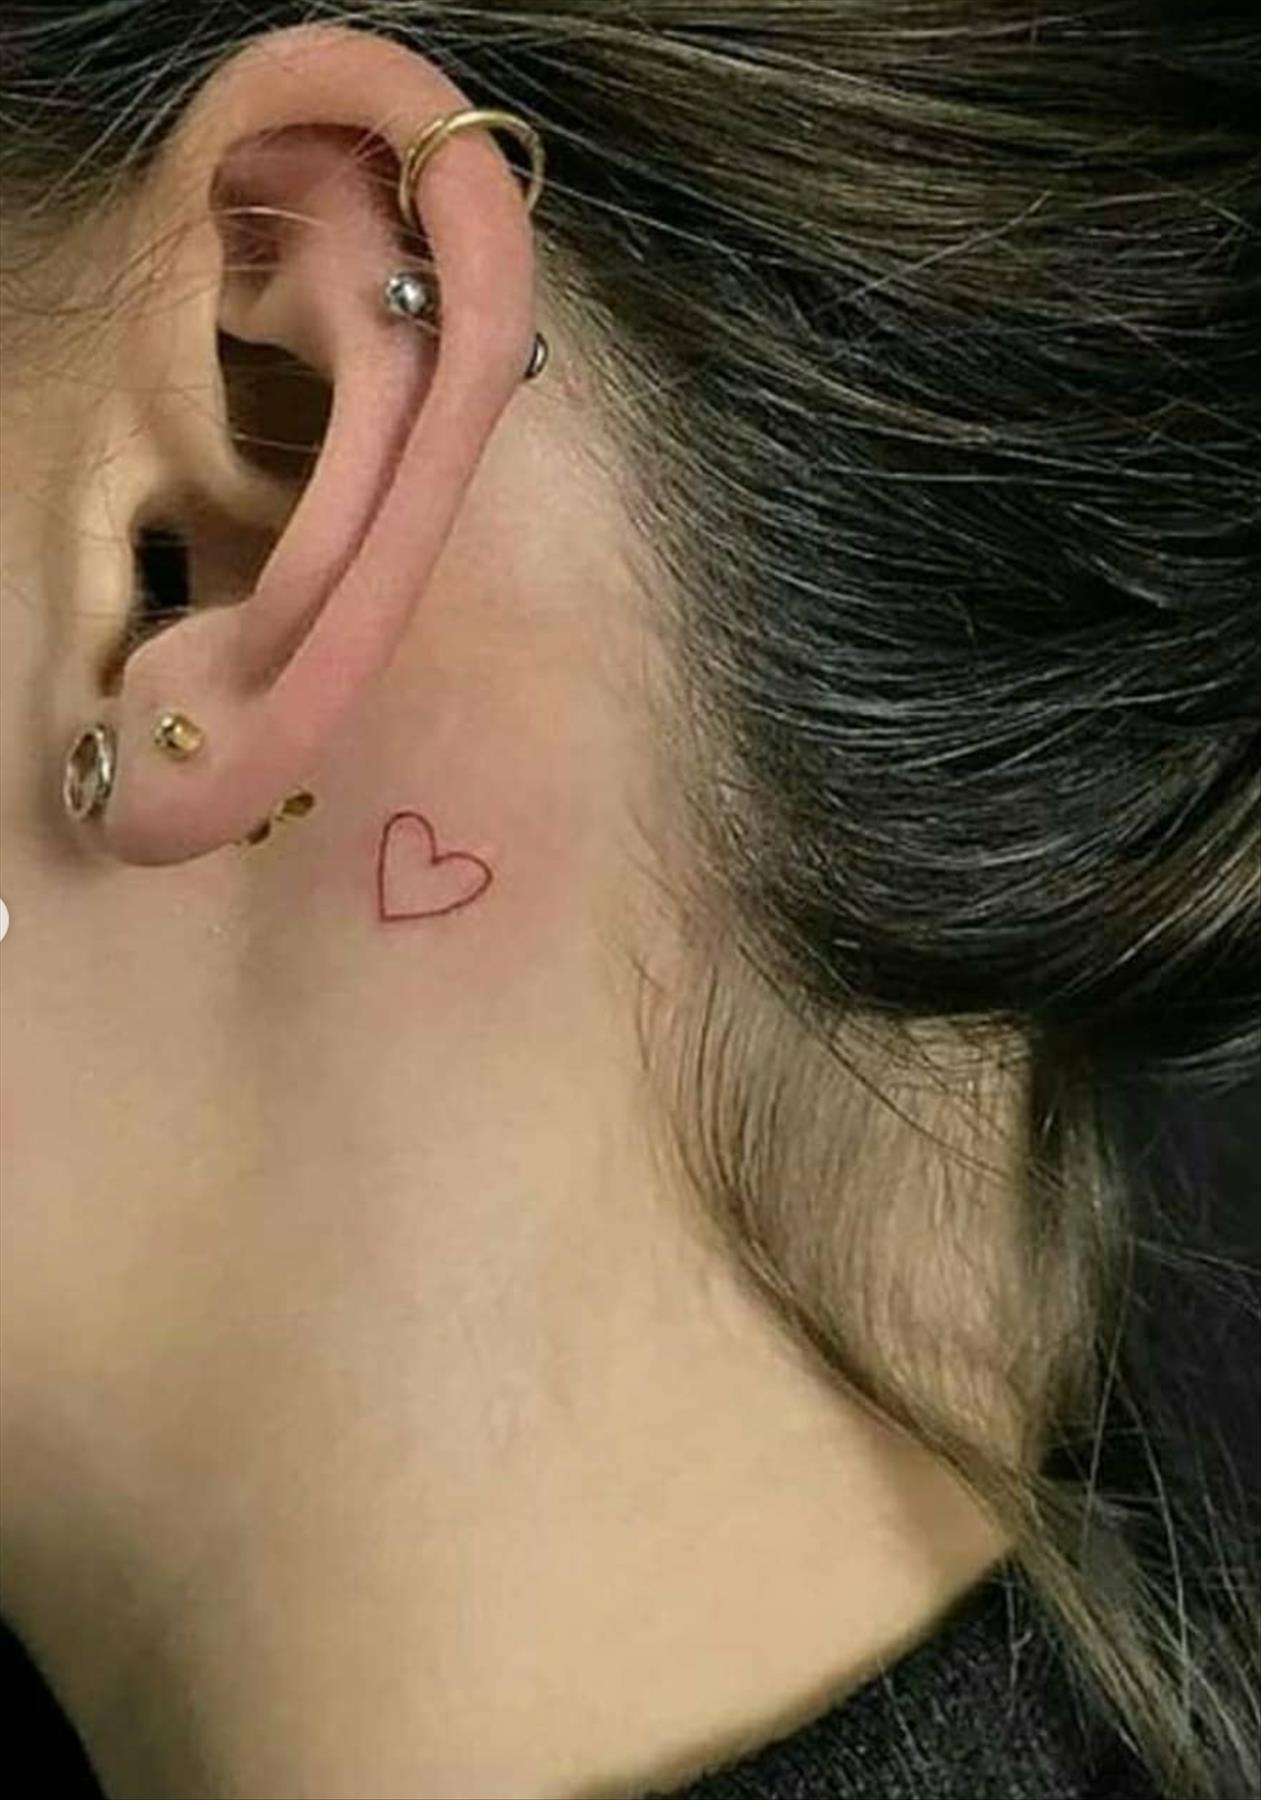 Cool behind the ear tattoos design for girls